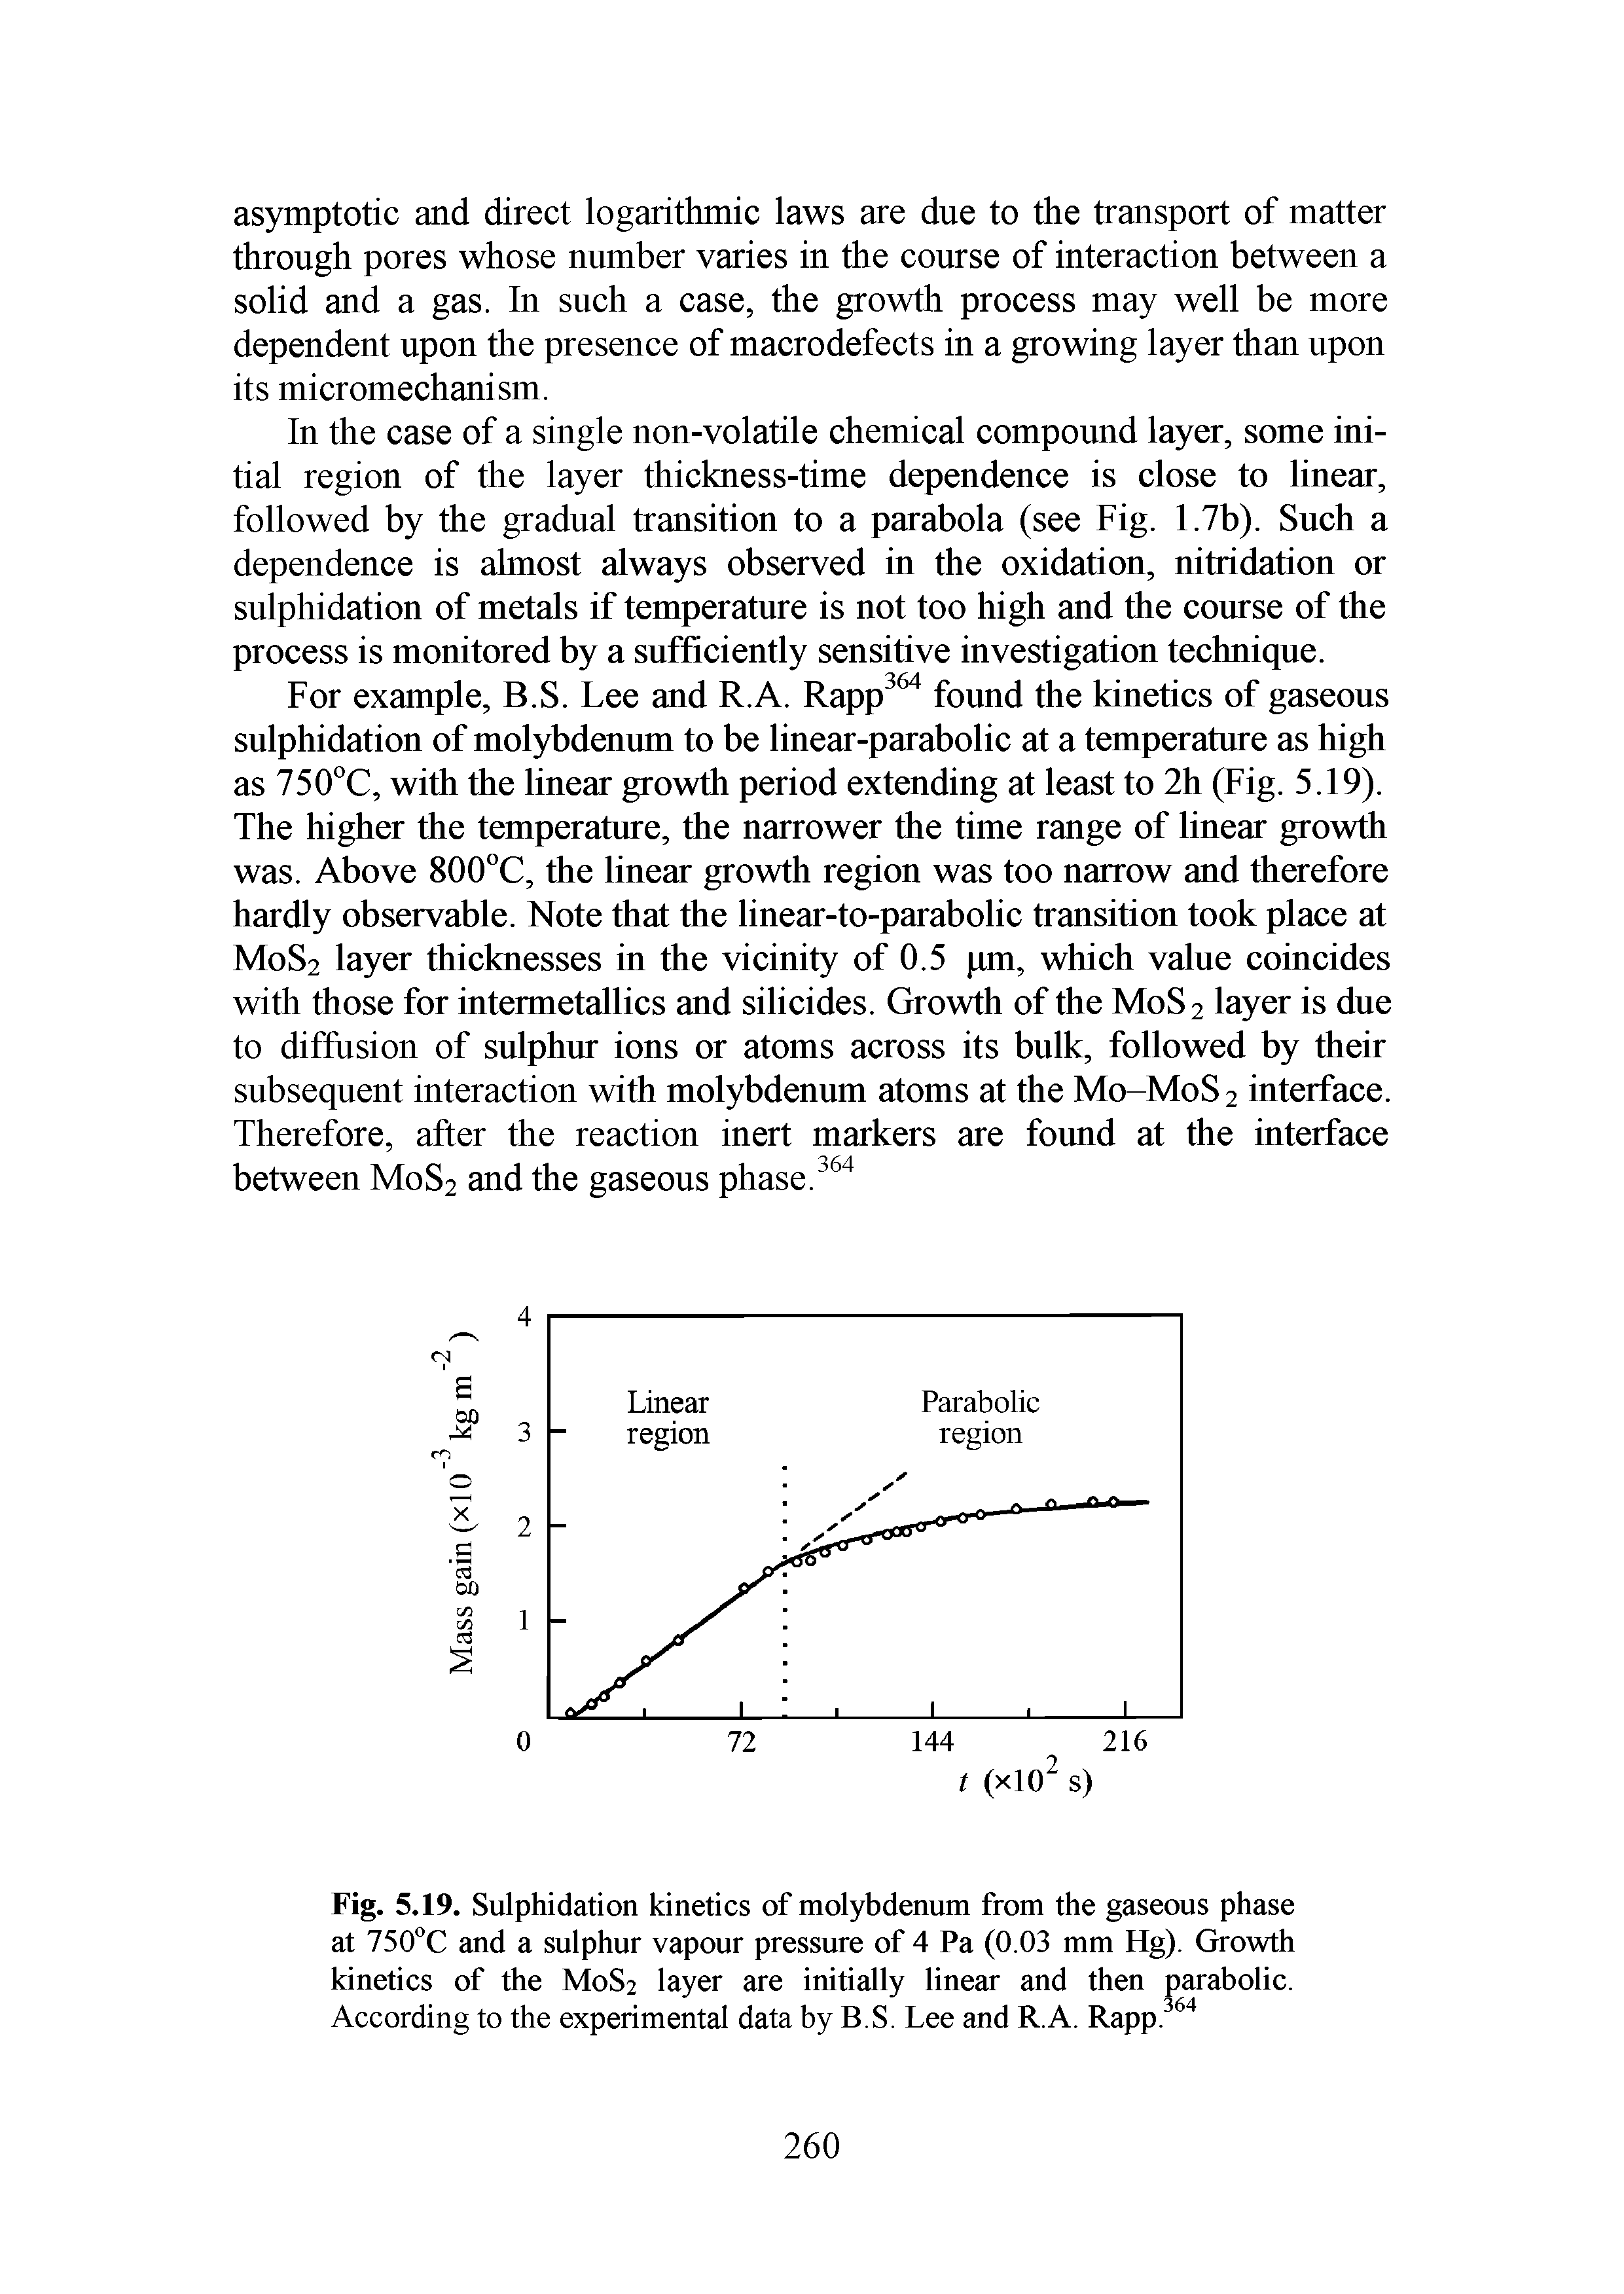 Fig. 5.19. Sulphidation kinetics of molybdenum from the gaseous phase at 750°C and a sulphur vapour pressure of 4 Pa (0.03 mm Hg). Growth kinetics of the M0S2 layer are initially linear and then parabolic. According to the experimental data by B.S. Lee and R.A. Rapp.364...